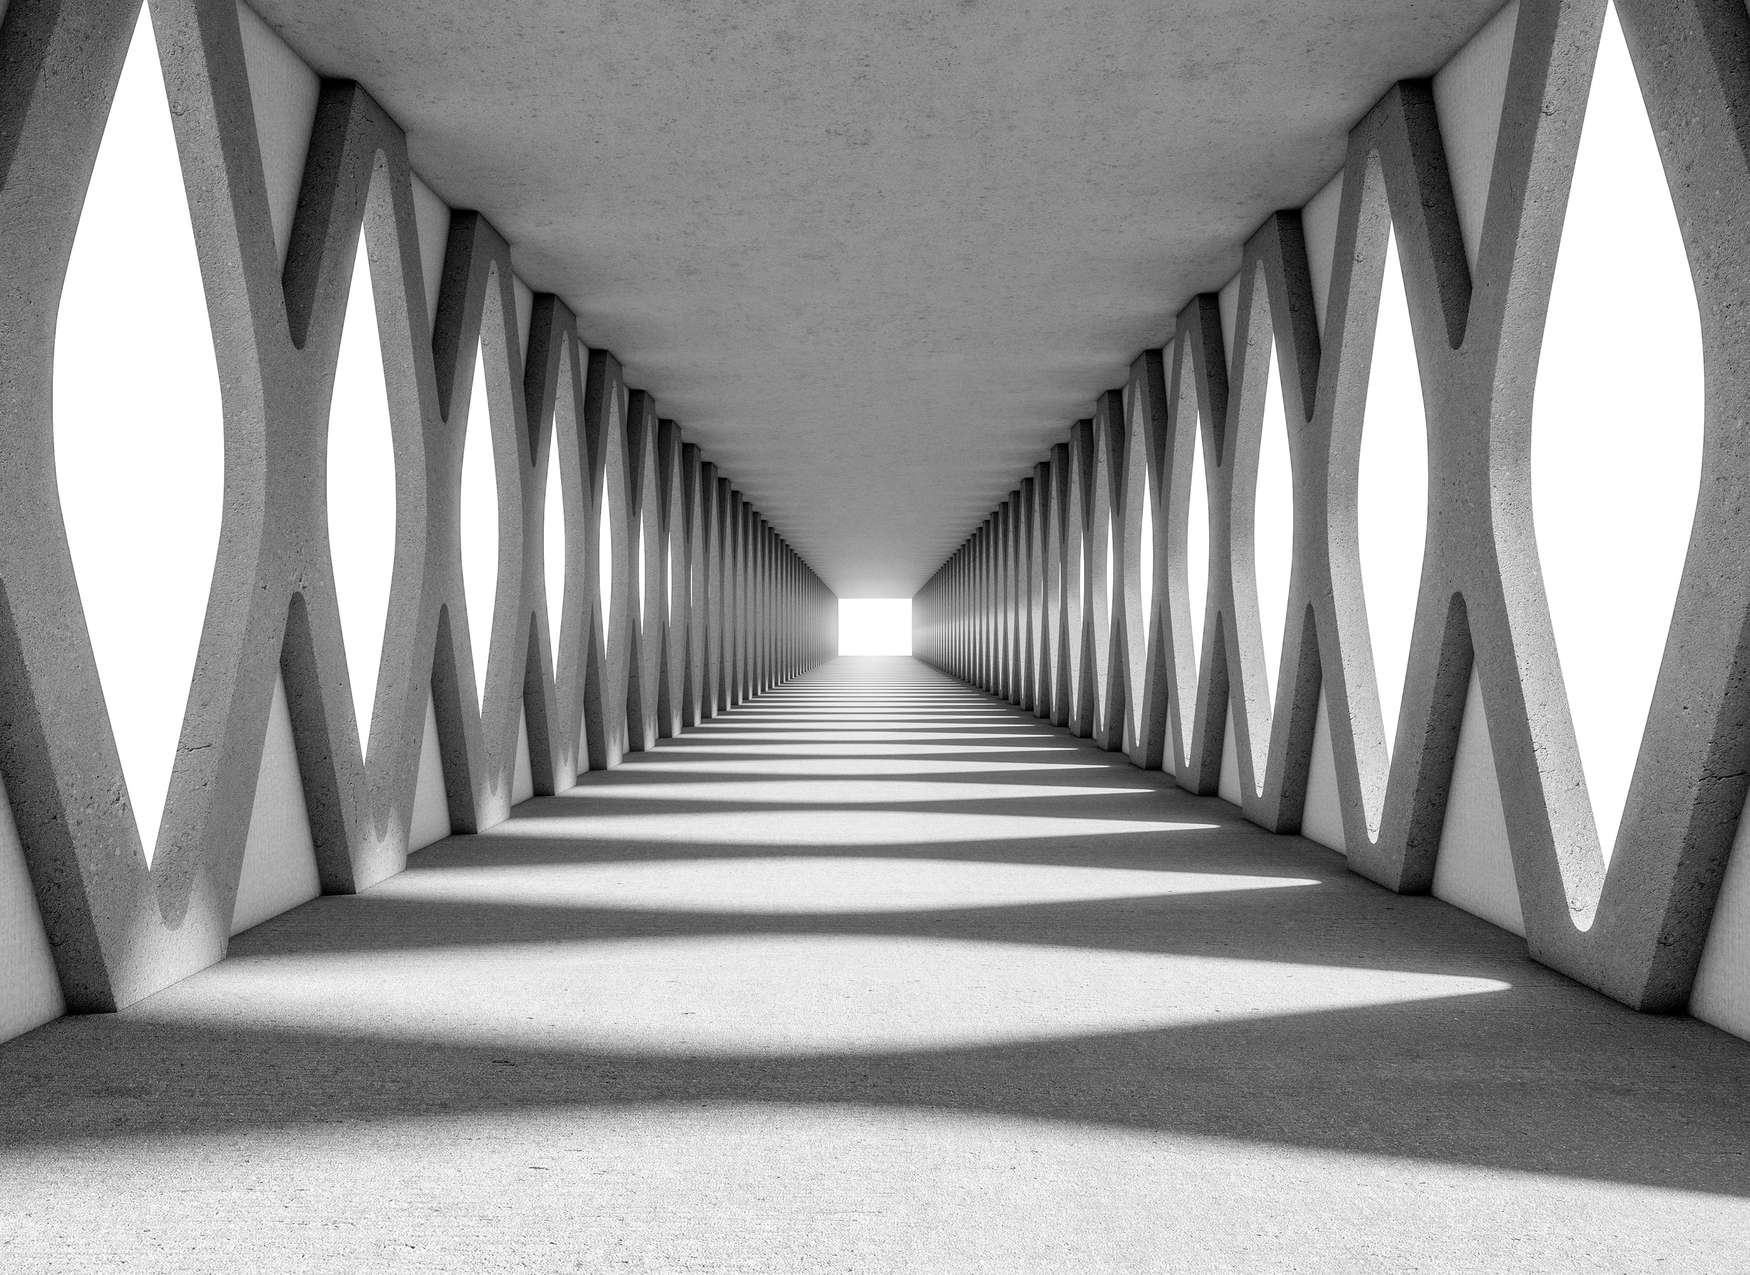             Aisle of concrete with 3D look - grey, white
        